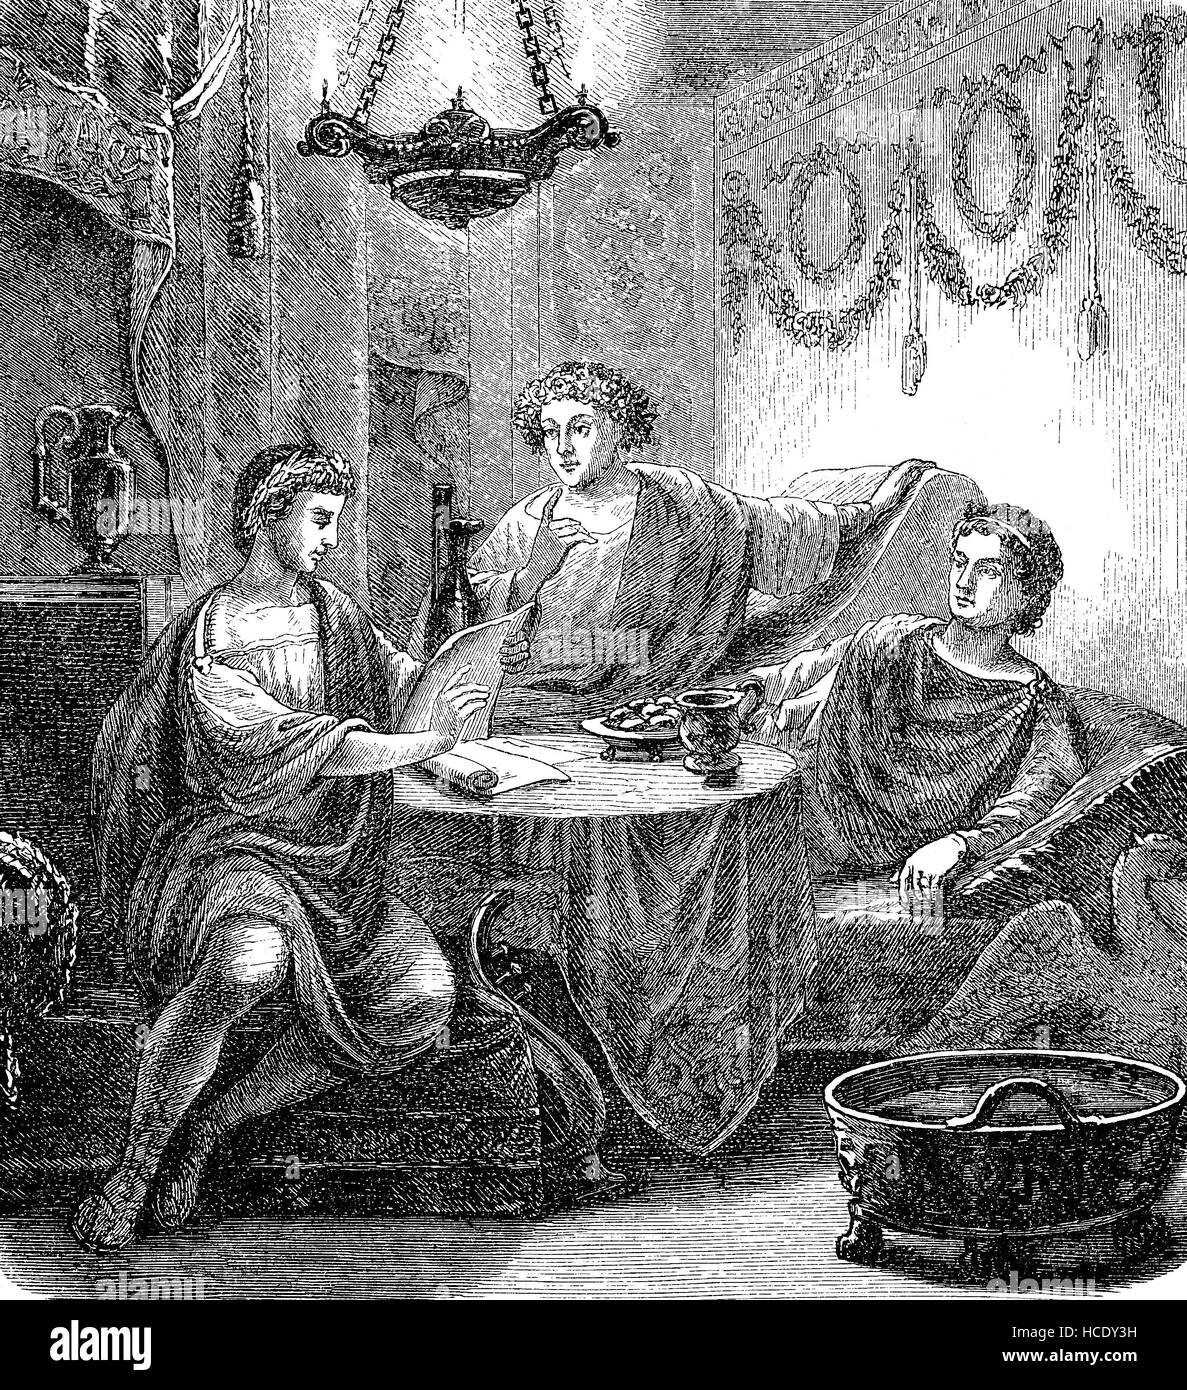 Quintus Horatius Flaccus, 65 BC - 8 BC, Horace, the leading Roman lyric poet during the time of Augustus and Gaius Cilnius Maecenas, 68 BC - 8 BC in the triclinium, a formal dining room in a Roman building, of Augustus, 63 BC - 14 AD, the founder of the Roman Principate and considered the first Emperor, the story of the ancient Rome, roman Empire, Italy Stock Photo